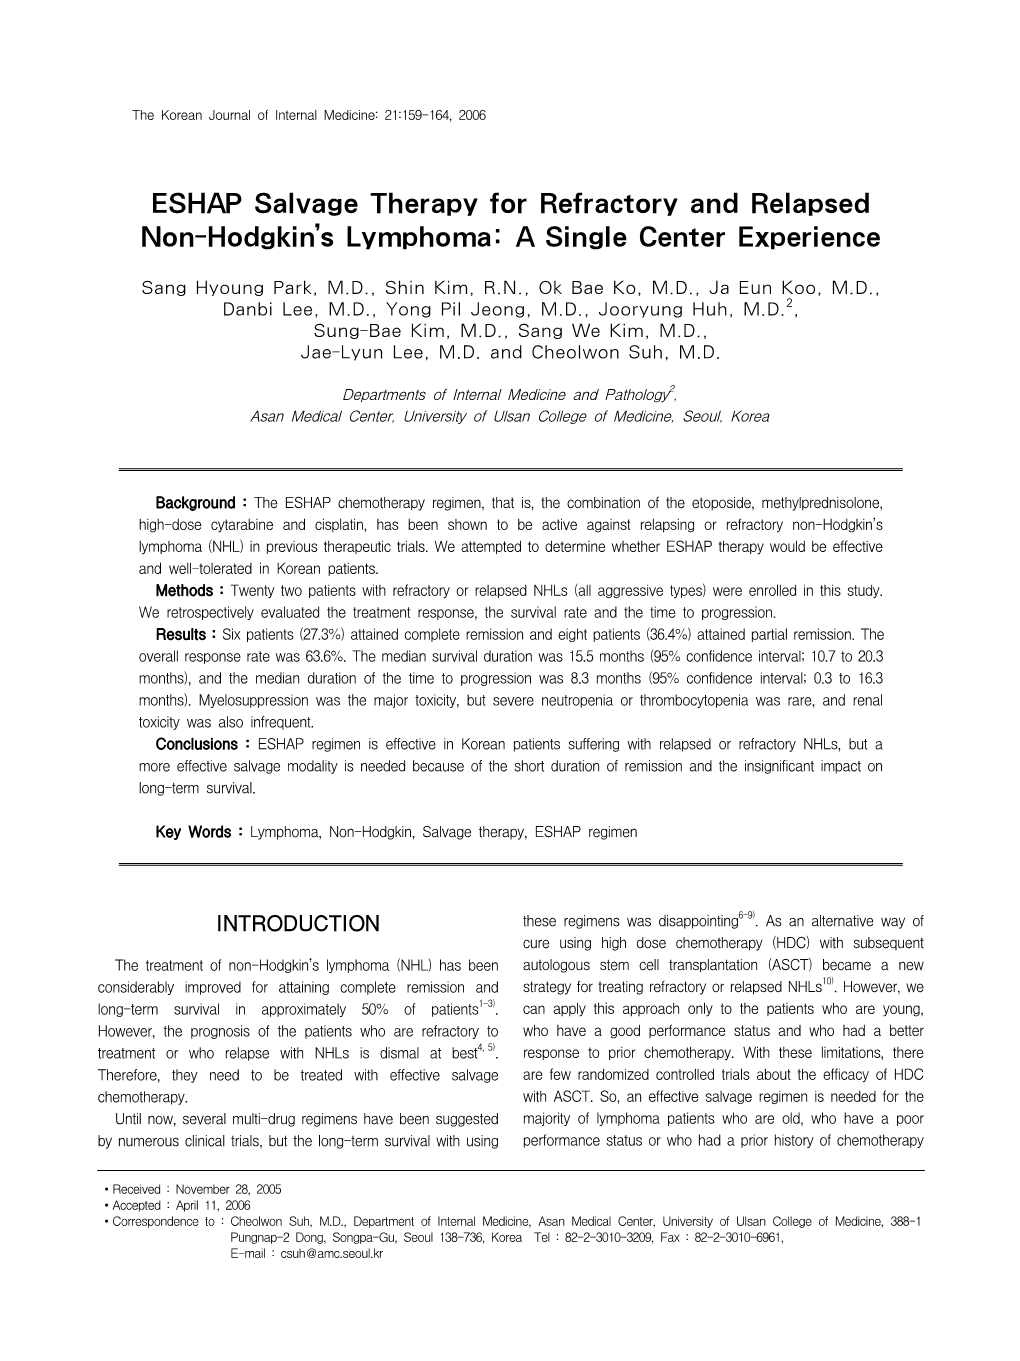 ESHAP Salvage Therapy for Refractory and Relapsed Non-Hodgkin’S Lymphoma: a Single Center Experience